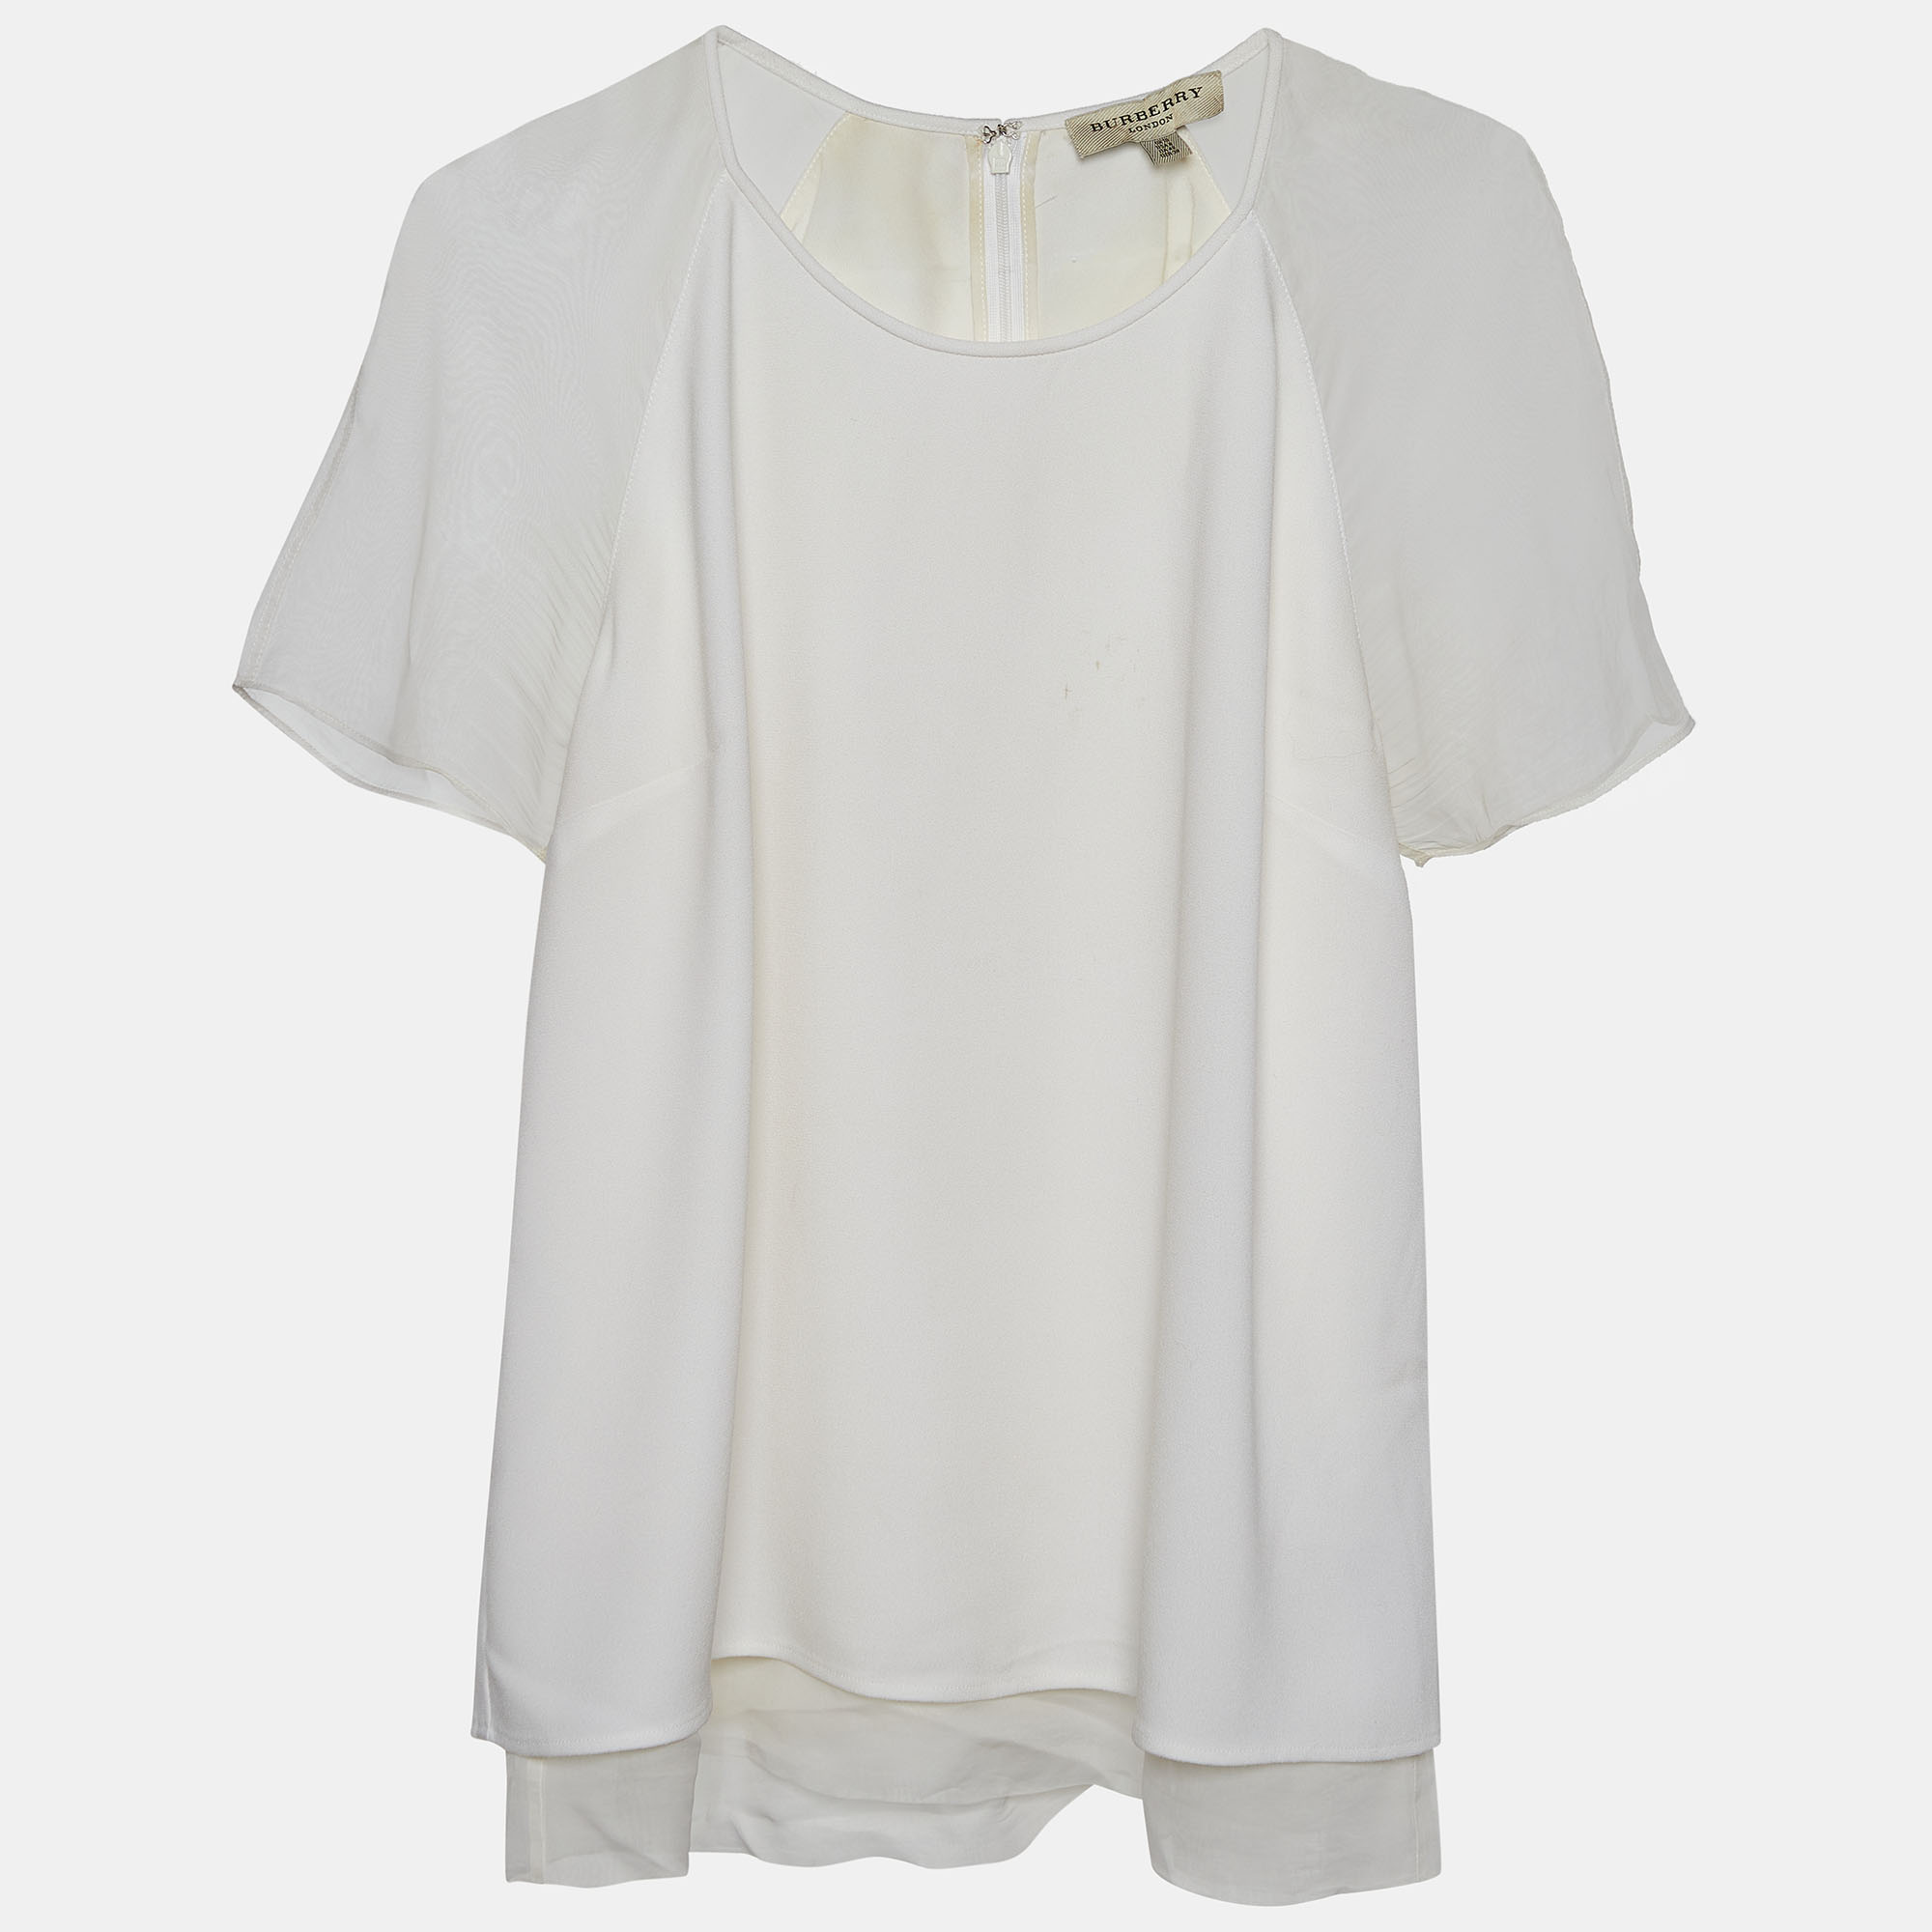 Pre-owned Burberry White Crepe Short Sleeve Top M